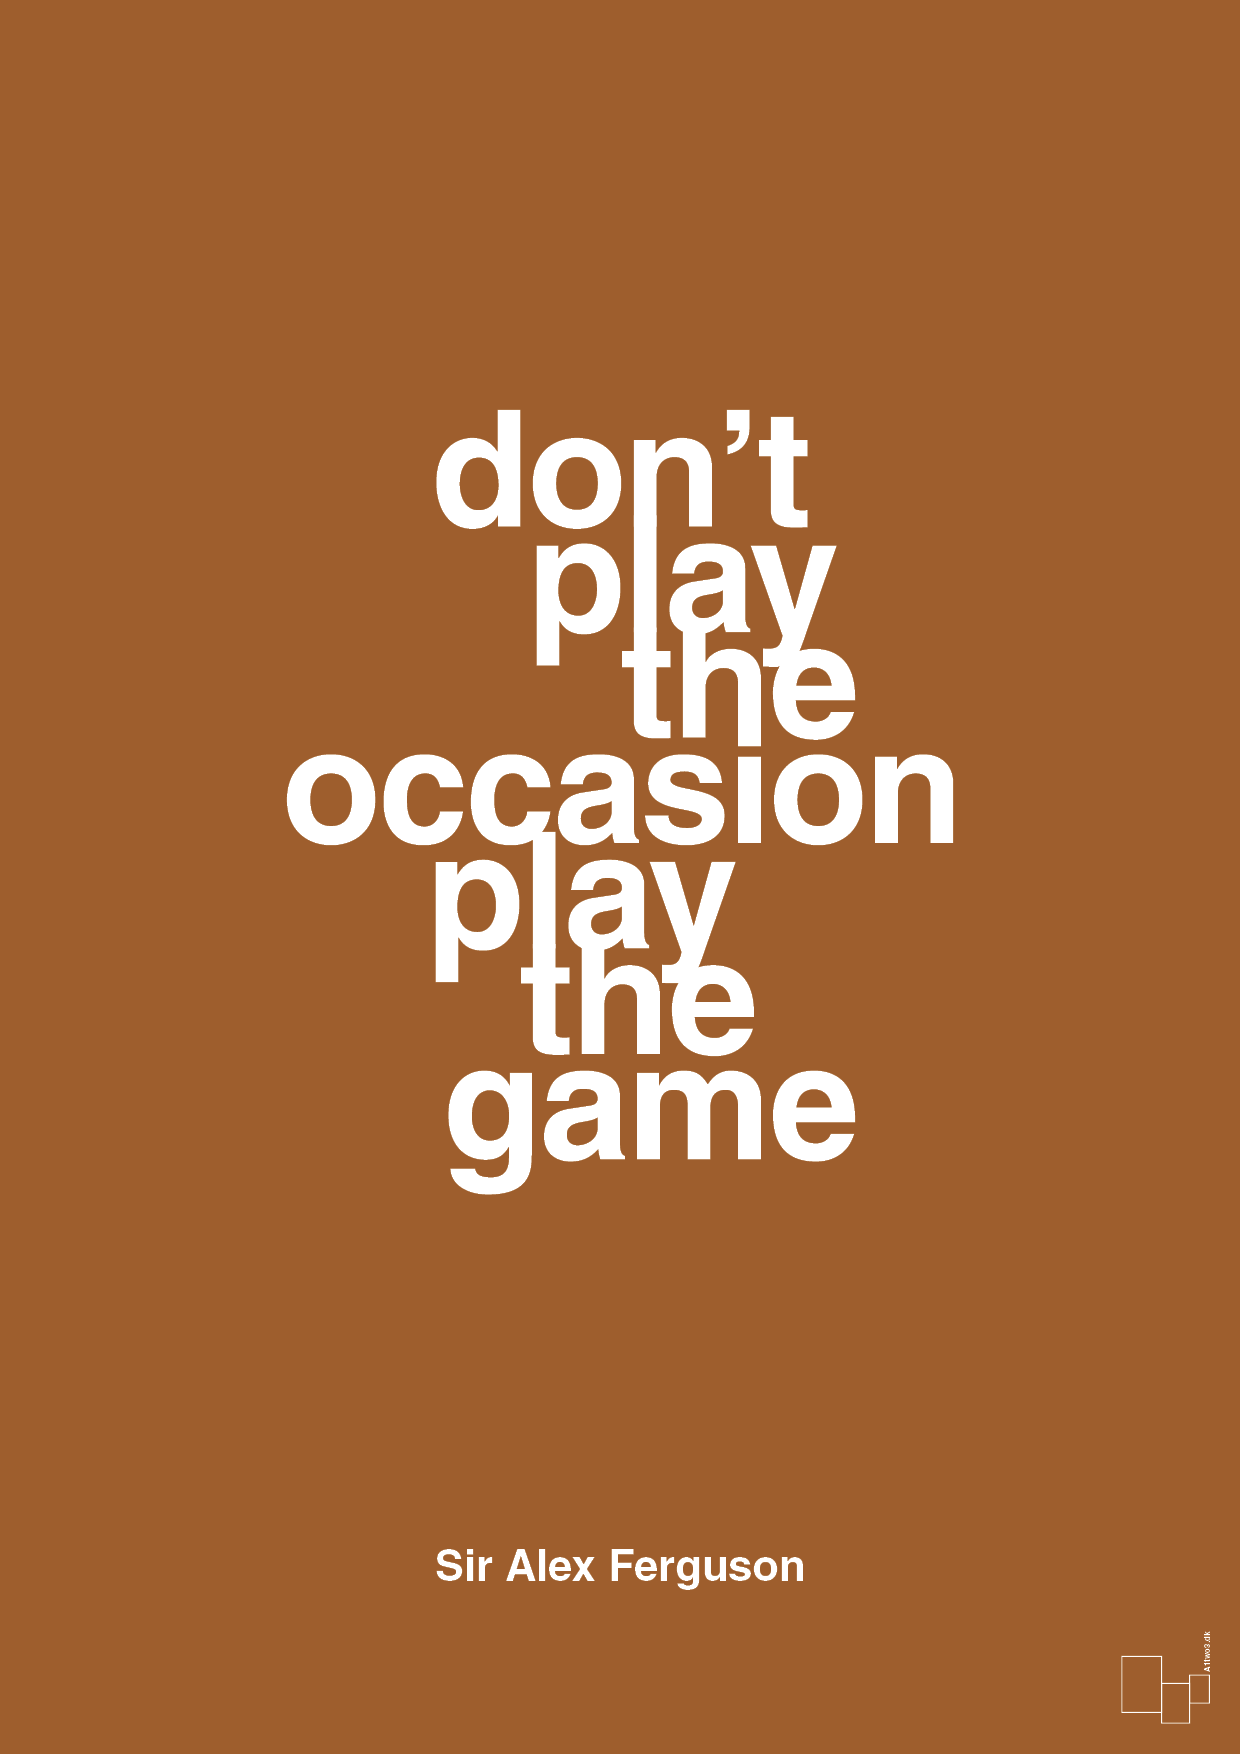 don’t play the occasion play the game - Plakat med Citater i Cognac